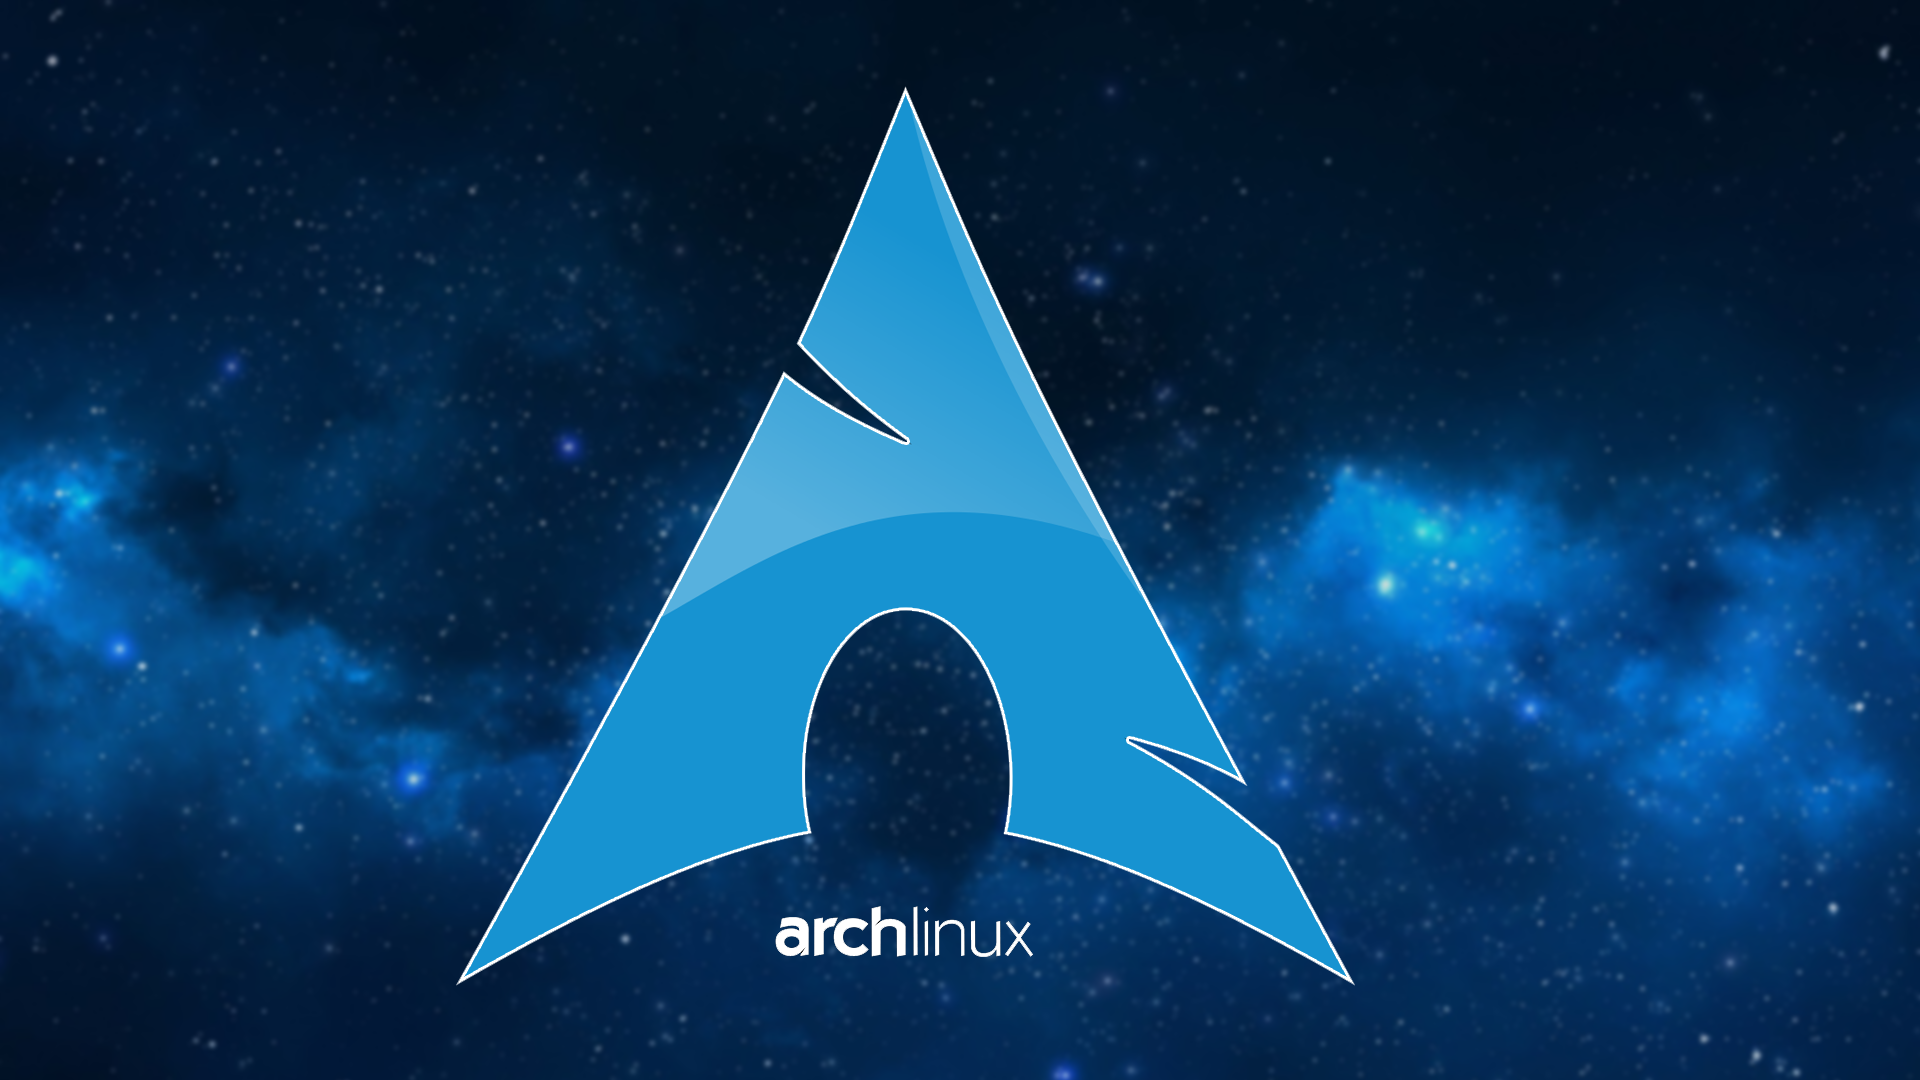 [wallpaper] Keep It Simple - Arch Linux , HD Wallpaper & Backgrounds